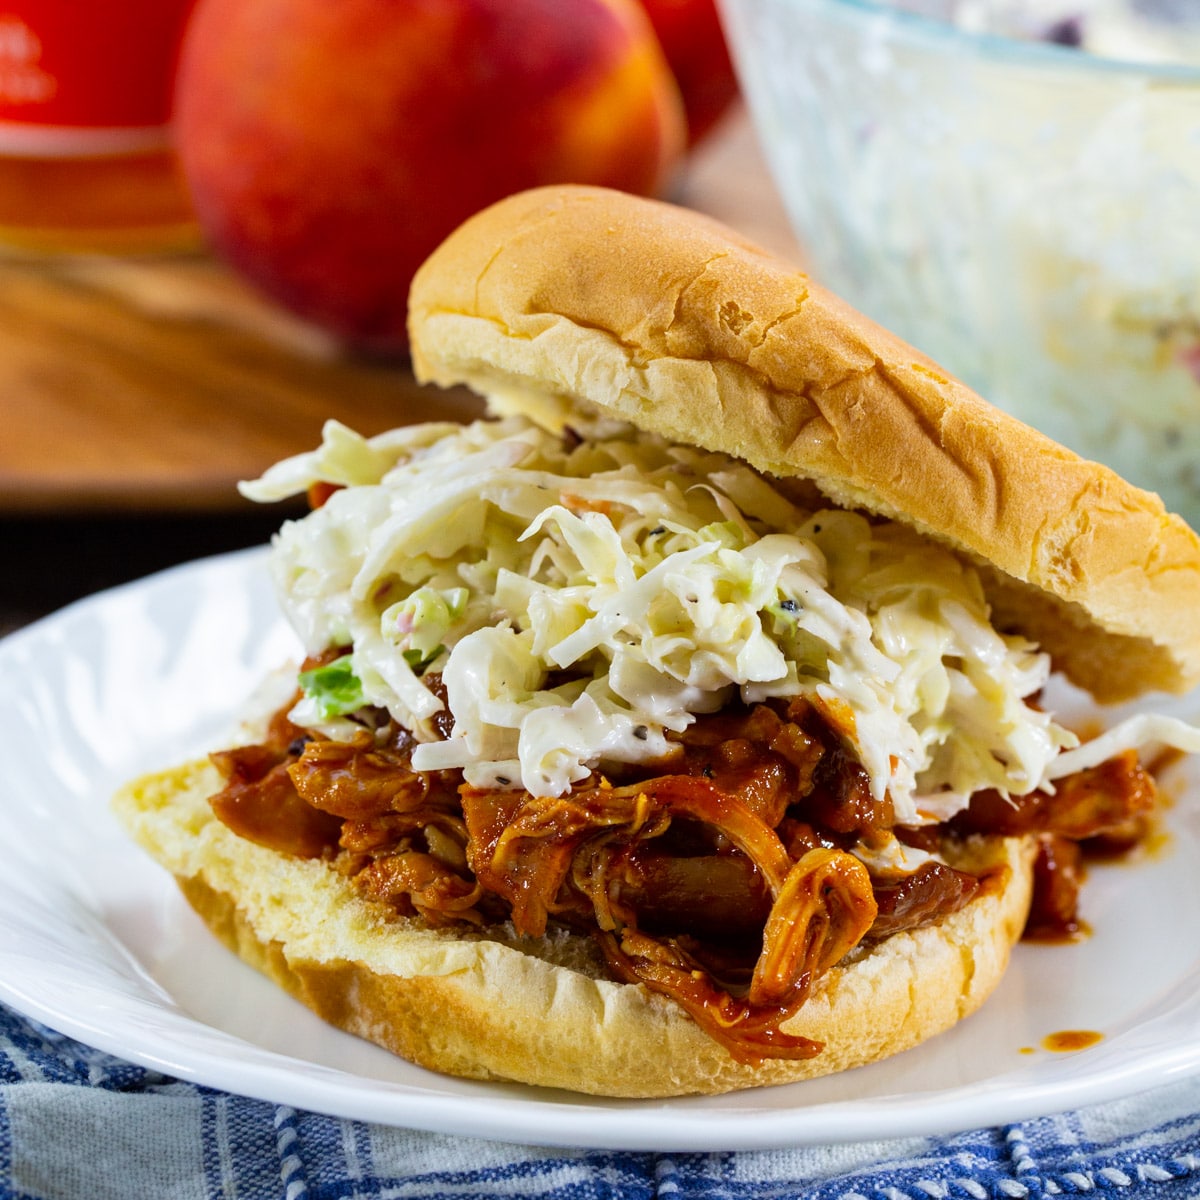 Slow Cooker BBQ Peach Pulled Chicken on a bun with coleslaw.